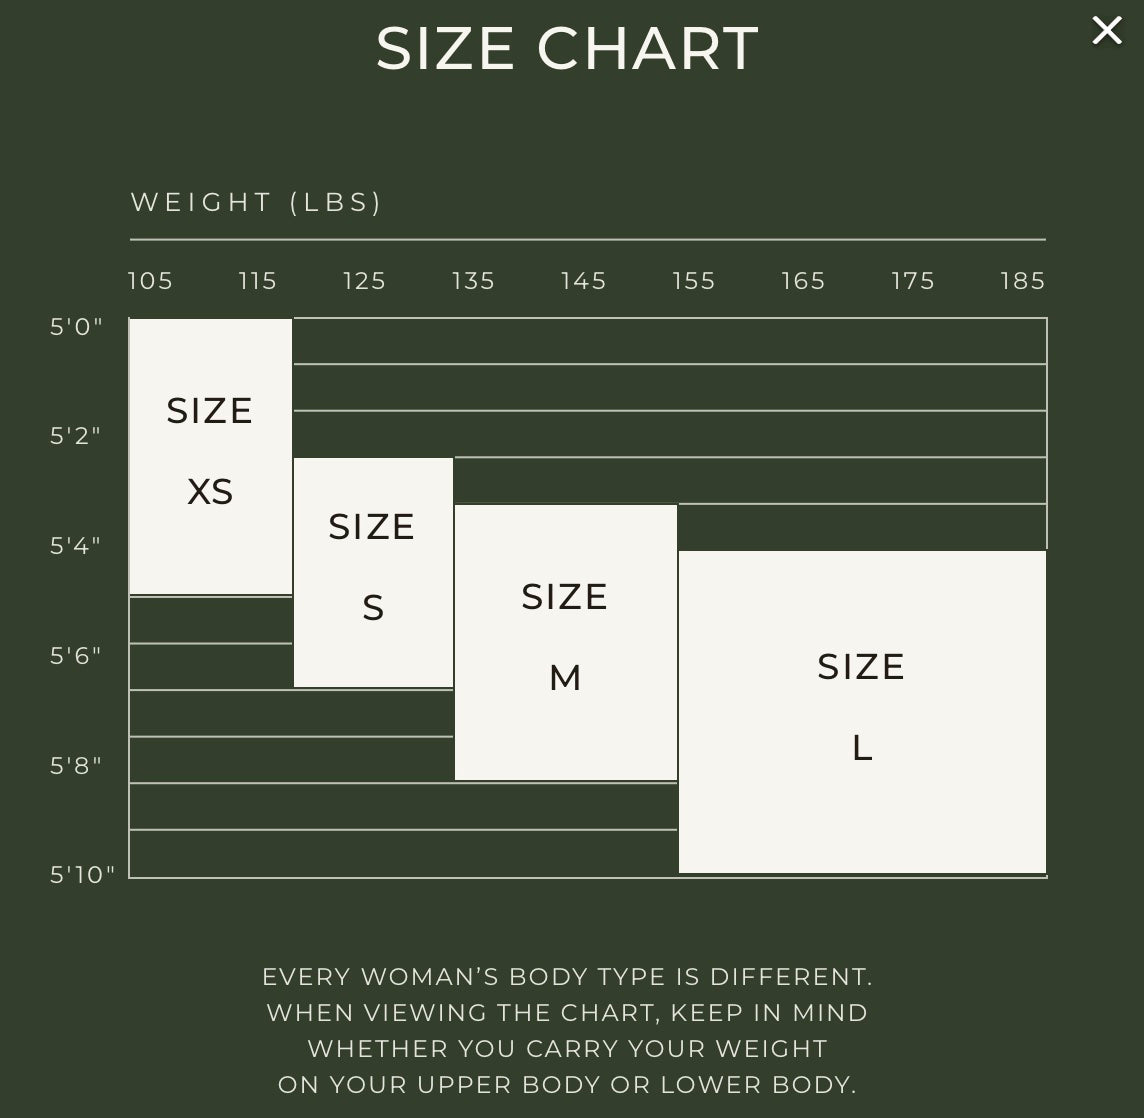 A size chart displaying women's clothing sizes xs, s, m, and l correlated to height in feet and inches and weight in pounds.